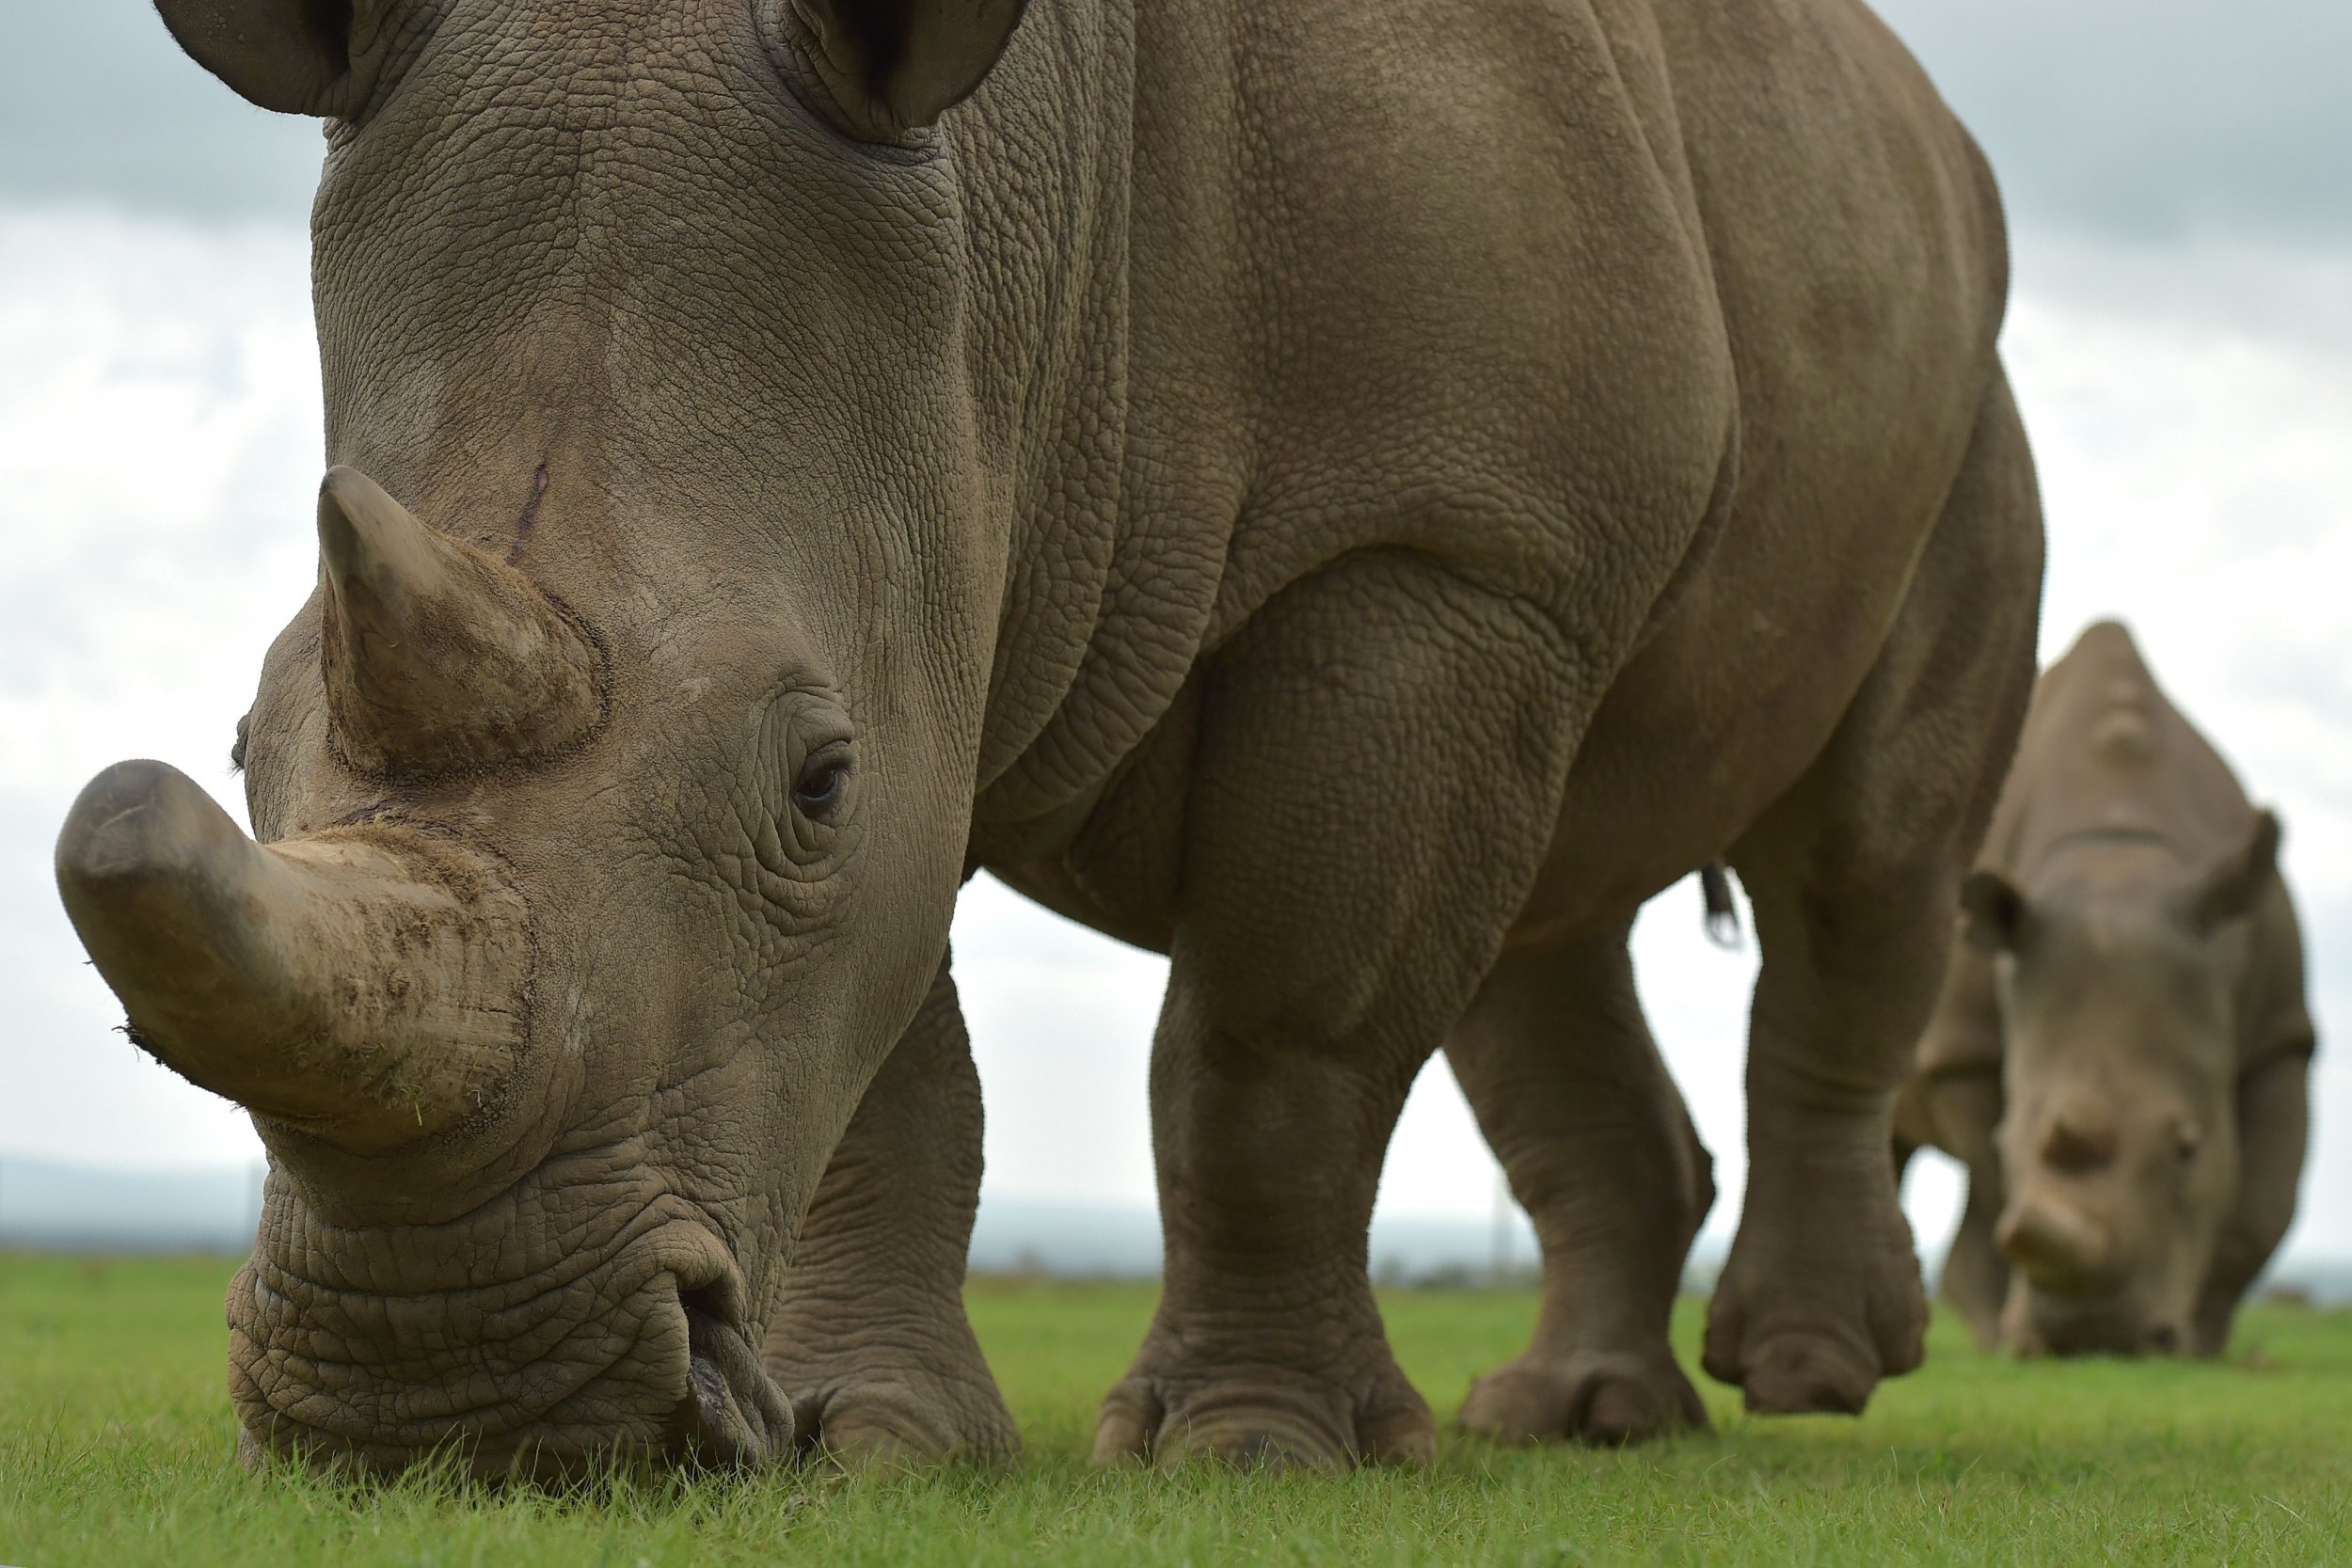 Northern White Rhino Extinction Can Science Save the Subspecies?